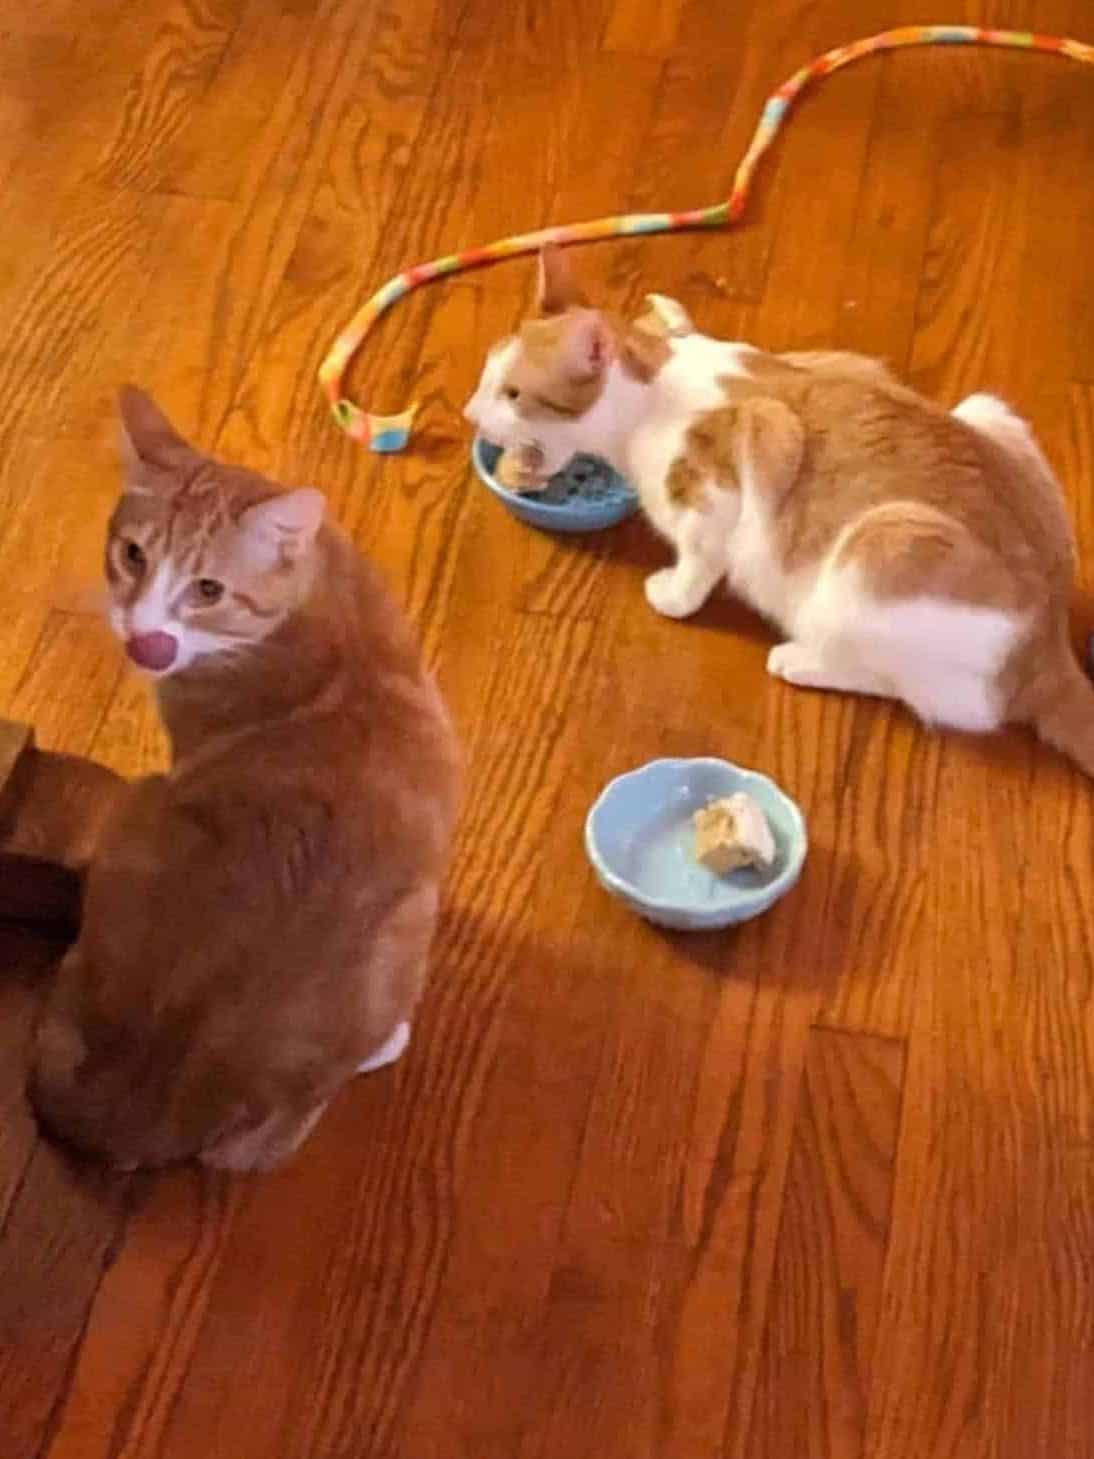 Orange Cat licking his lips while Orange and White Cat takes a bite of a cat cake